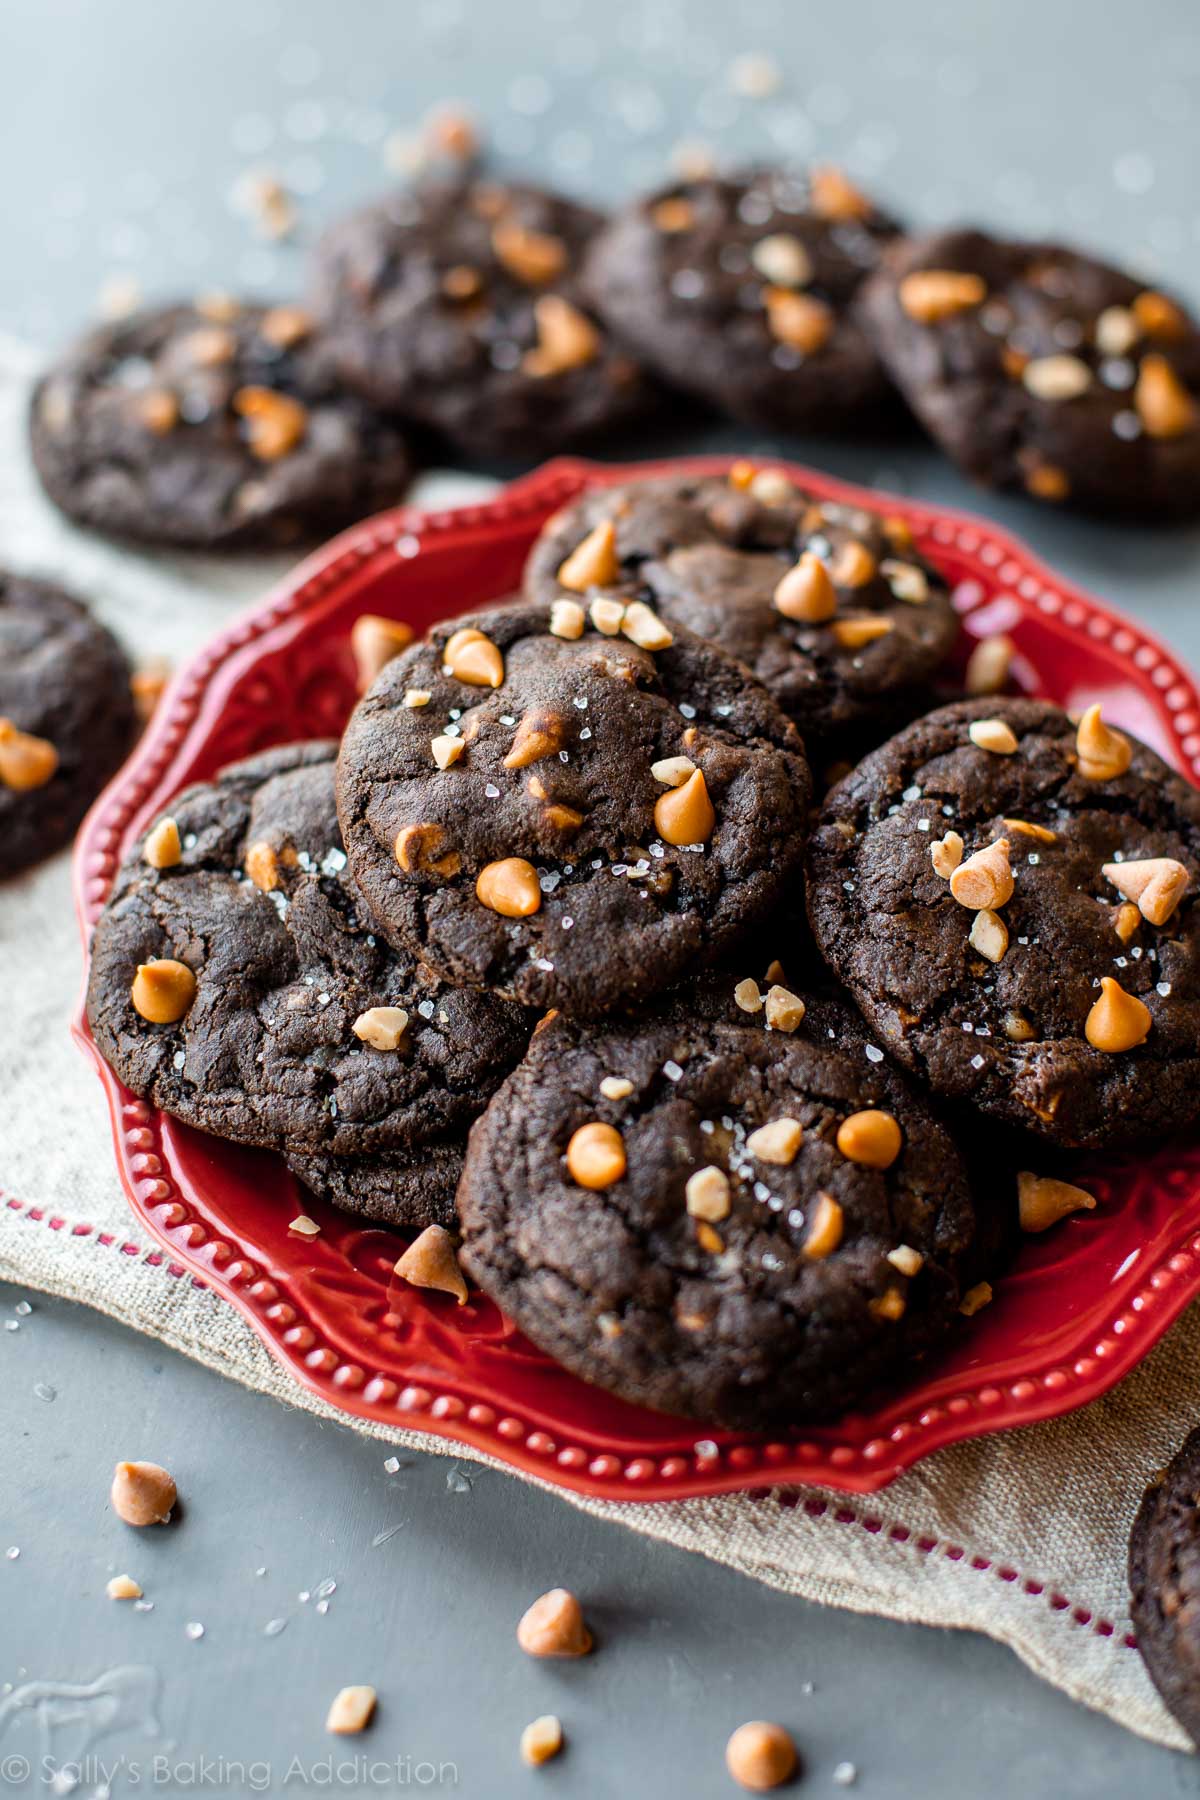 Butterscotch toffee fudge chocolate cookies on a red plate